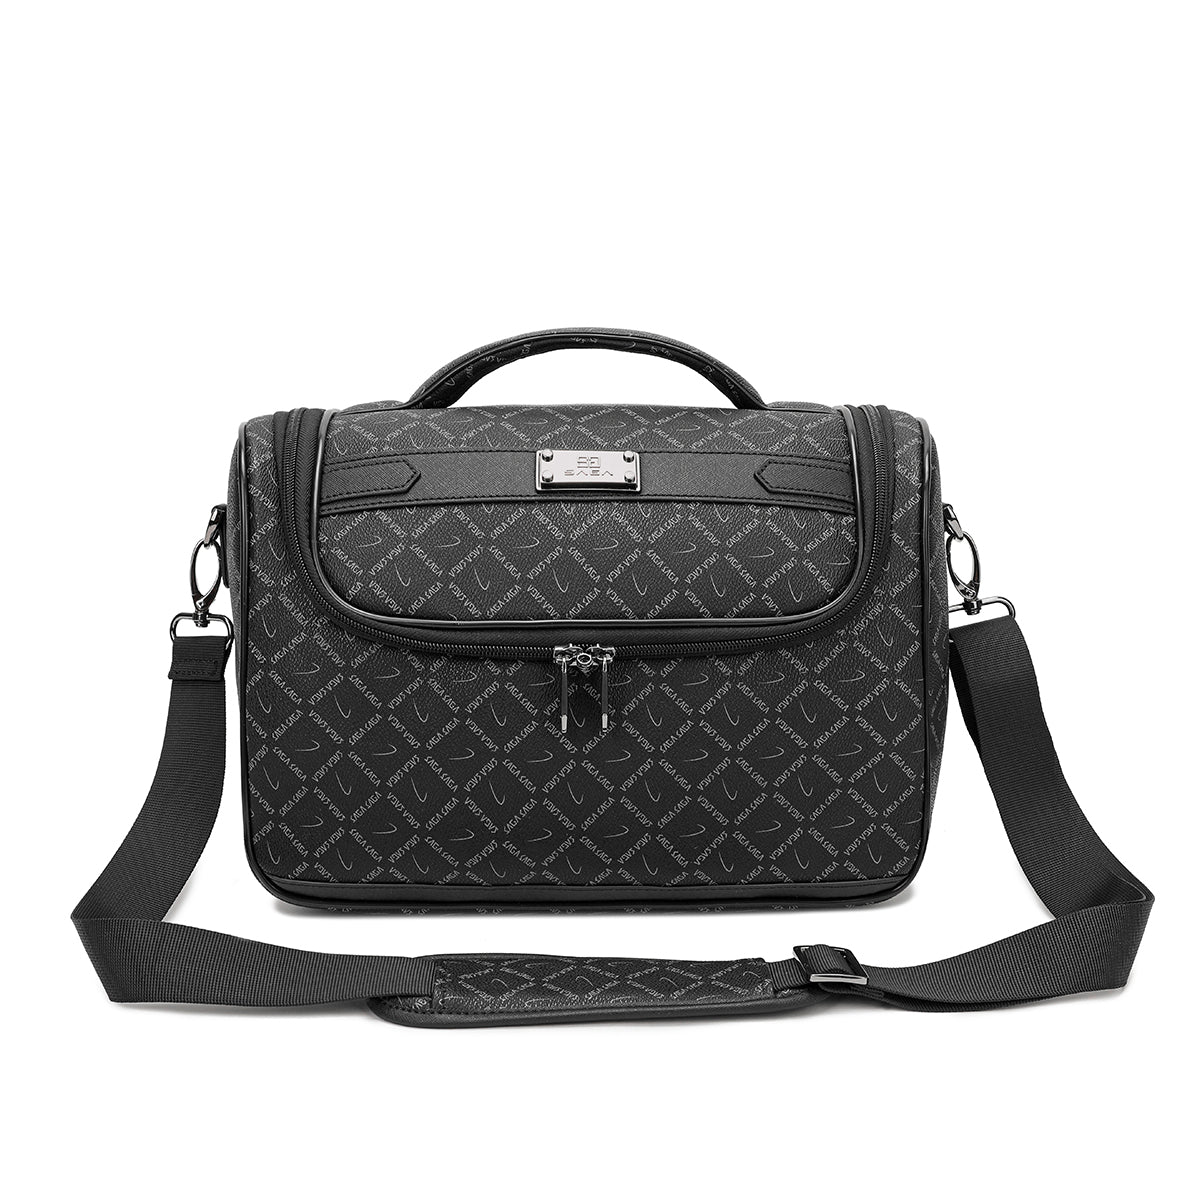 Travel bag 13 inch with shoulder strap for airplane, gray color